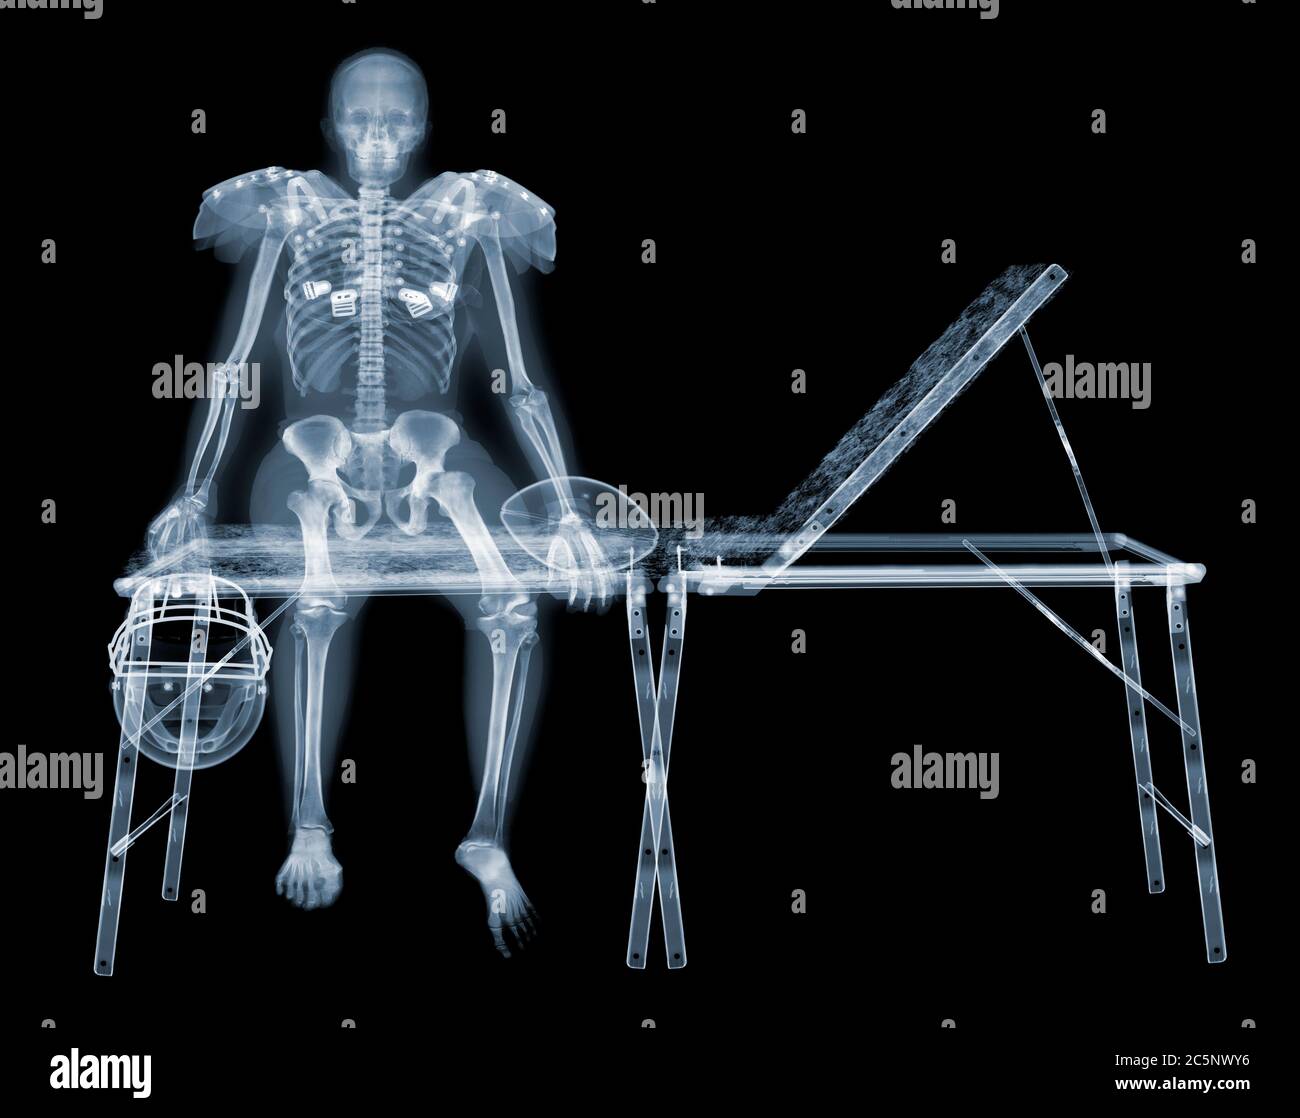 Skeleton of American footballer on sports couch, X-ray. Stock Photo